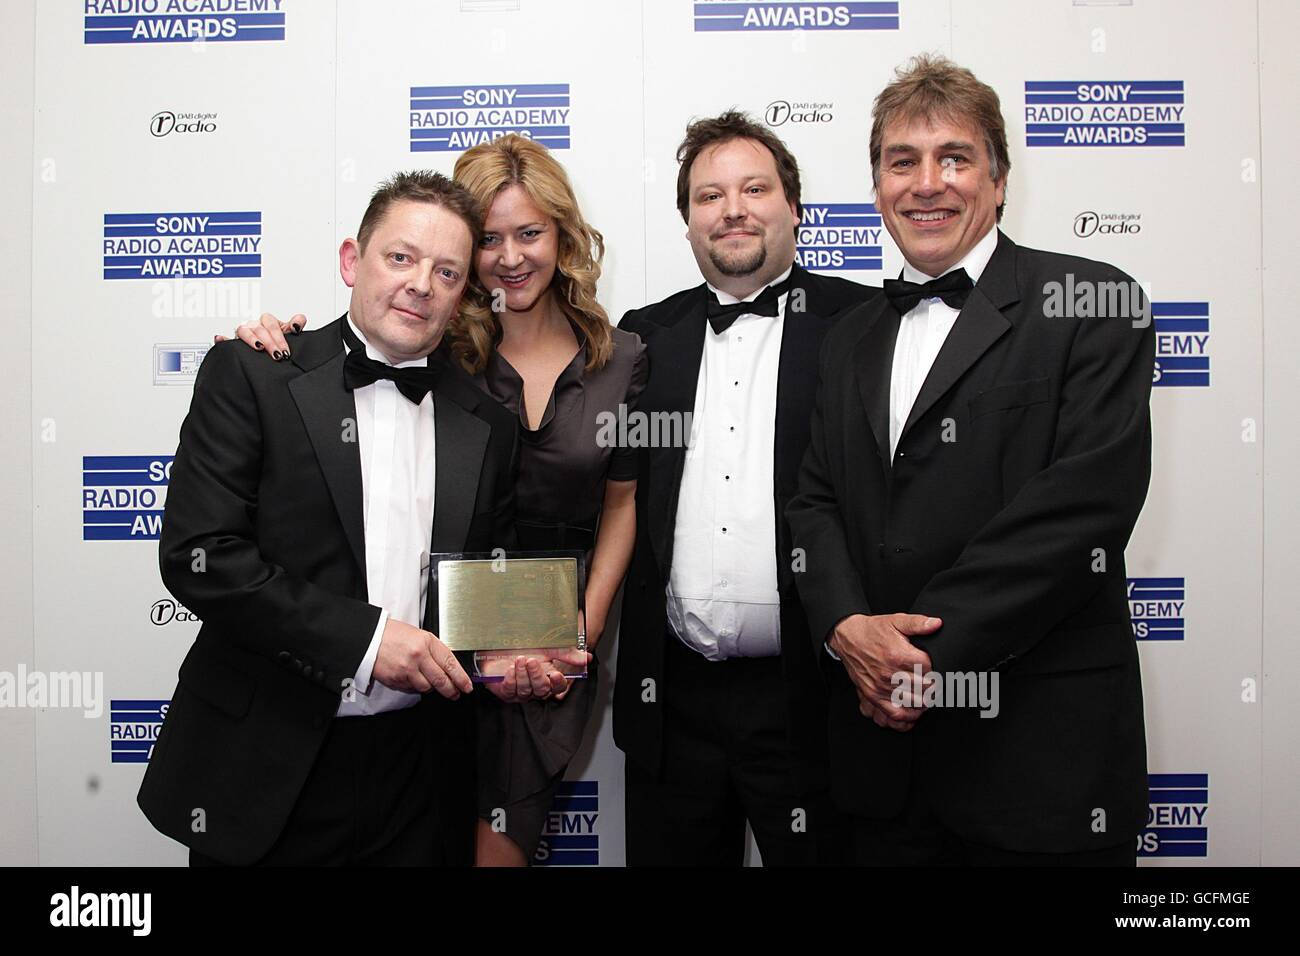 Talksport radio collect the award for Best Single Promo/commercial at the Sony Radio Academy Awards 2010 at the Grosvenor House Hotel, London Stock Photo